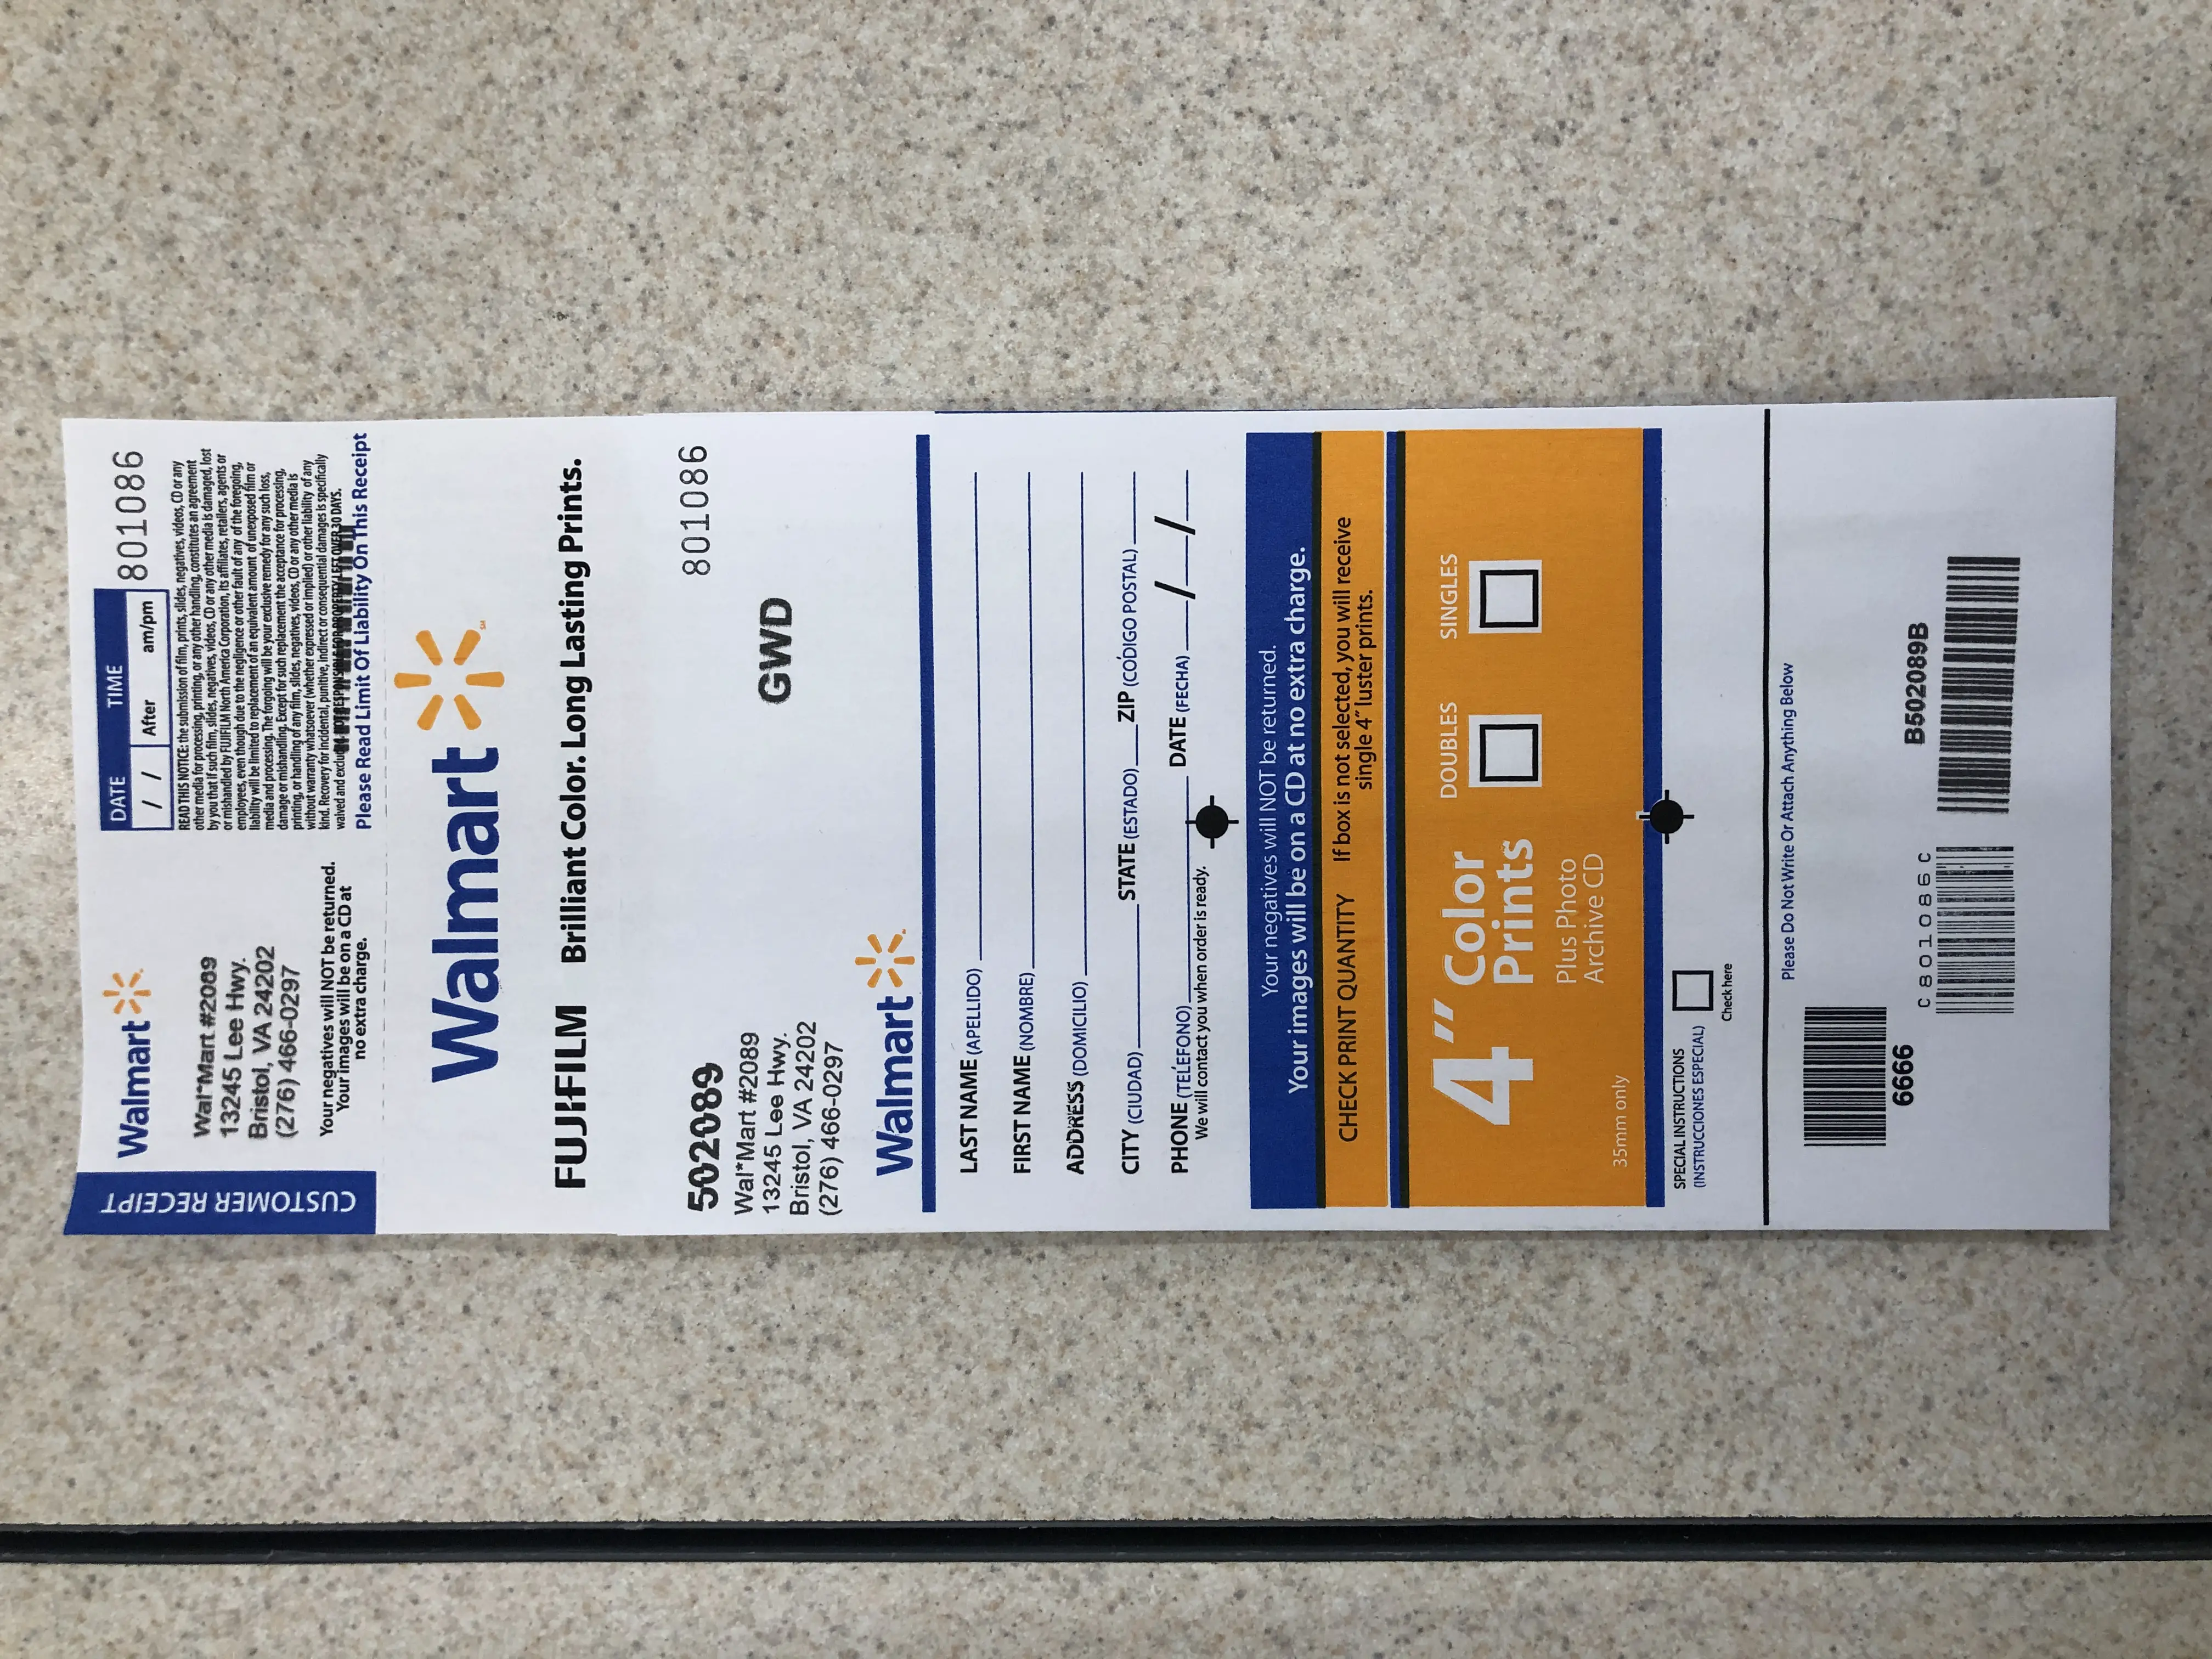 Front of the Film development form from Wal-Mart